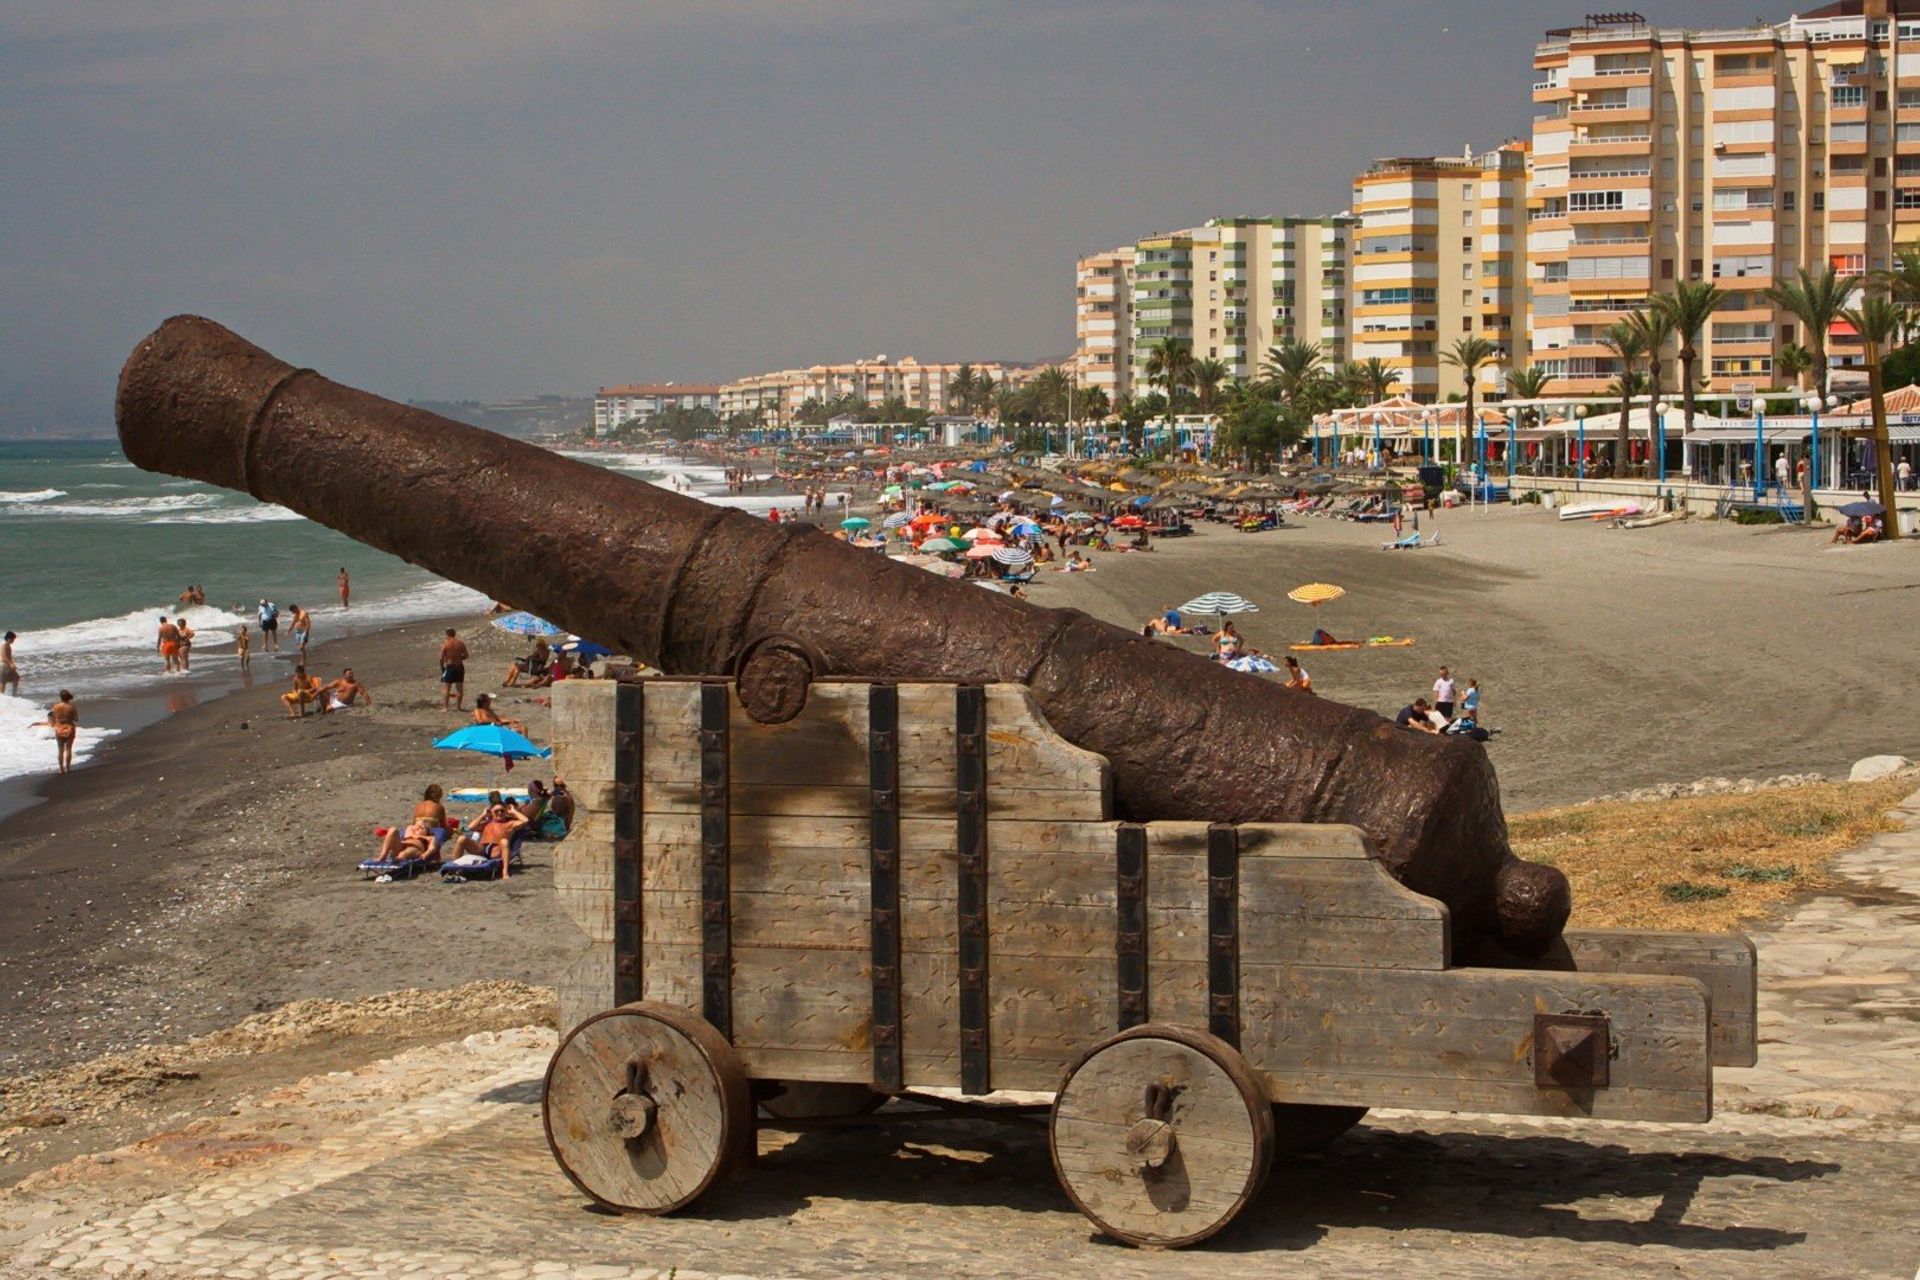 Take a stroll down Torrox Costa's vast beach promenade, home to a Roman cannon; a reminder of its interesting history